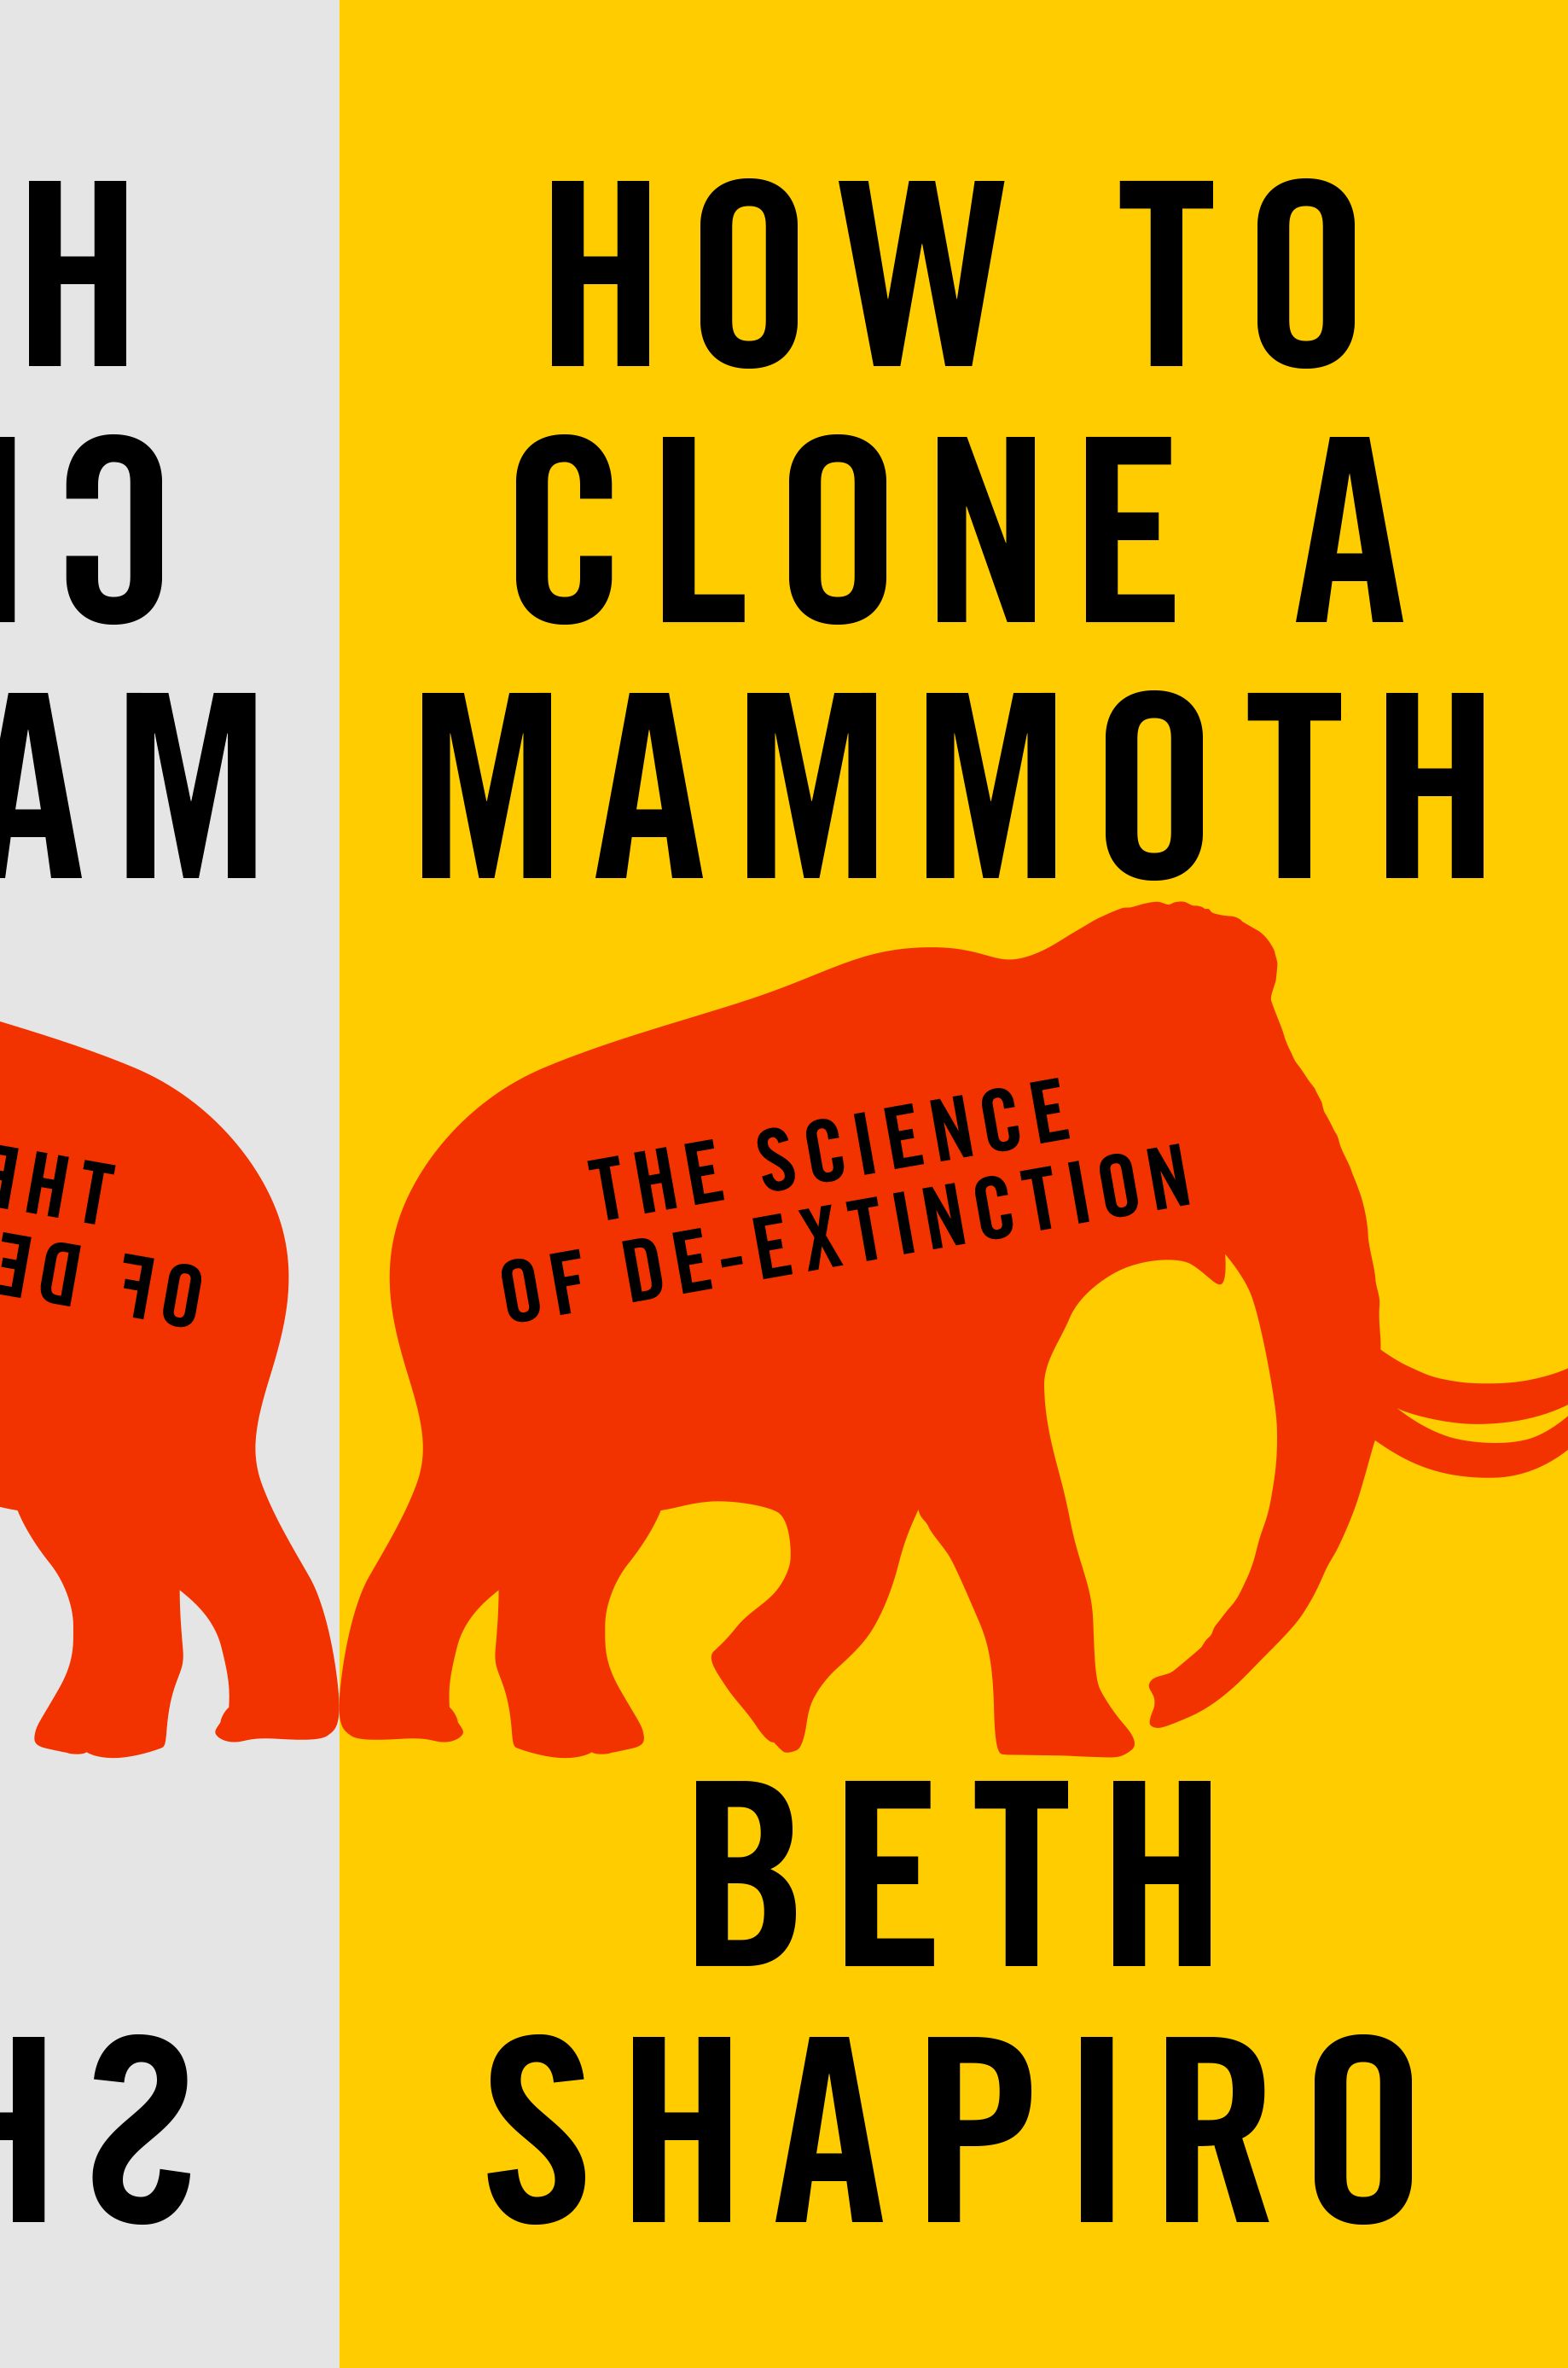 The science of de-extinction by Beth Shapiro.